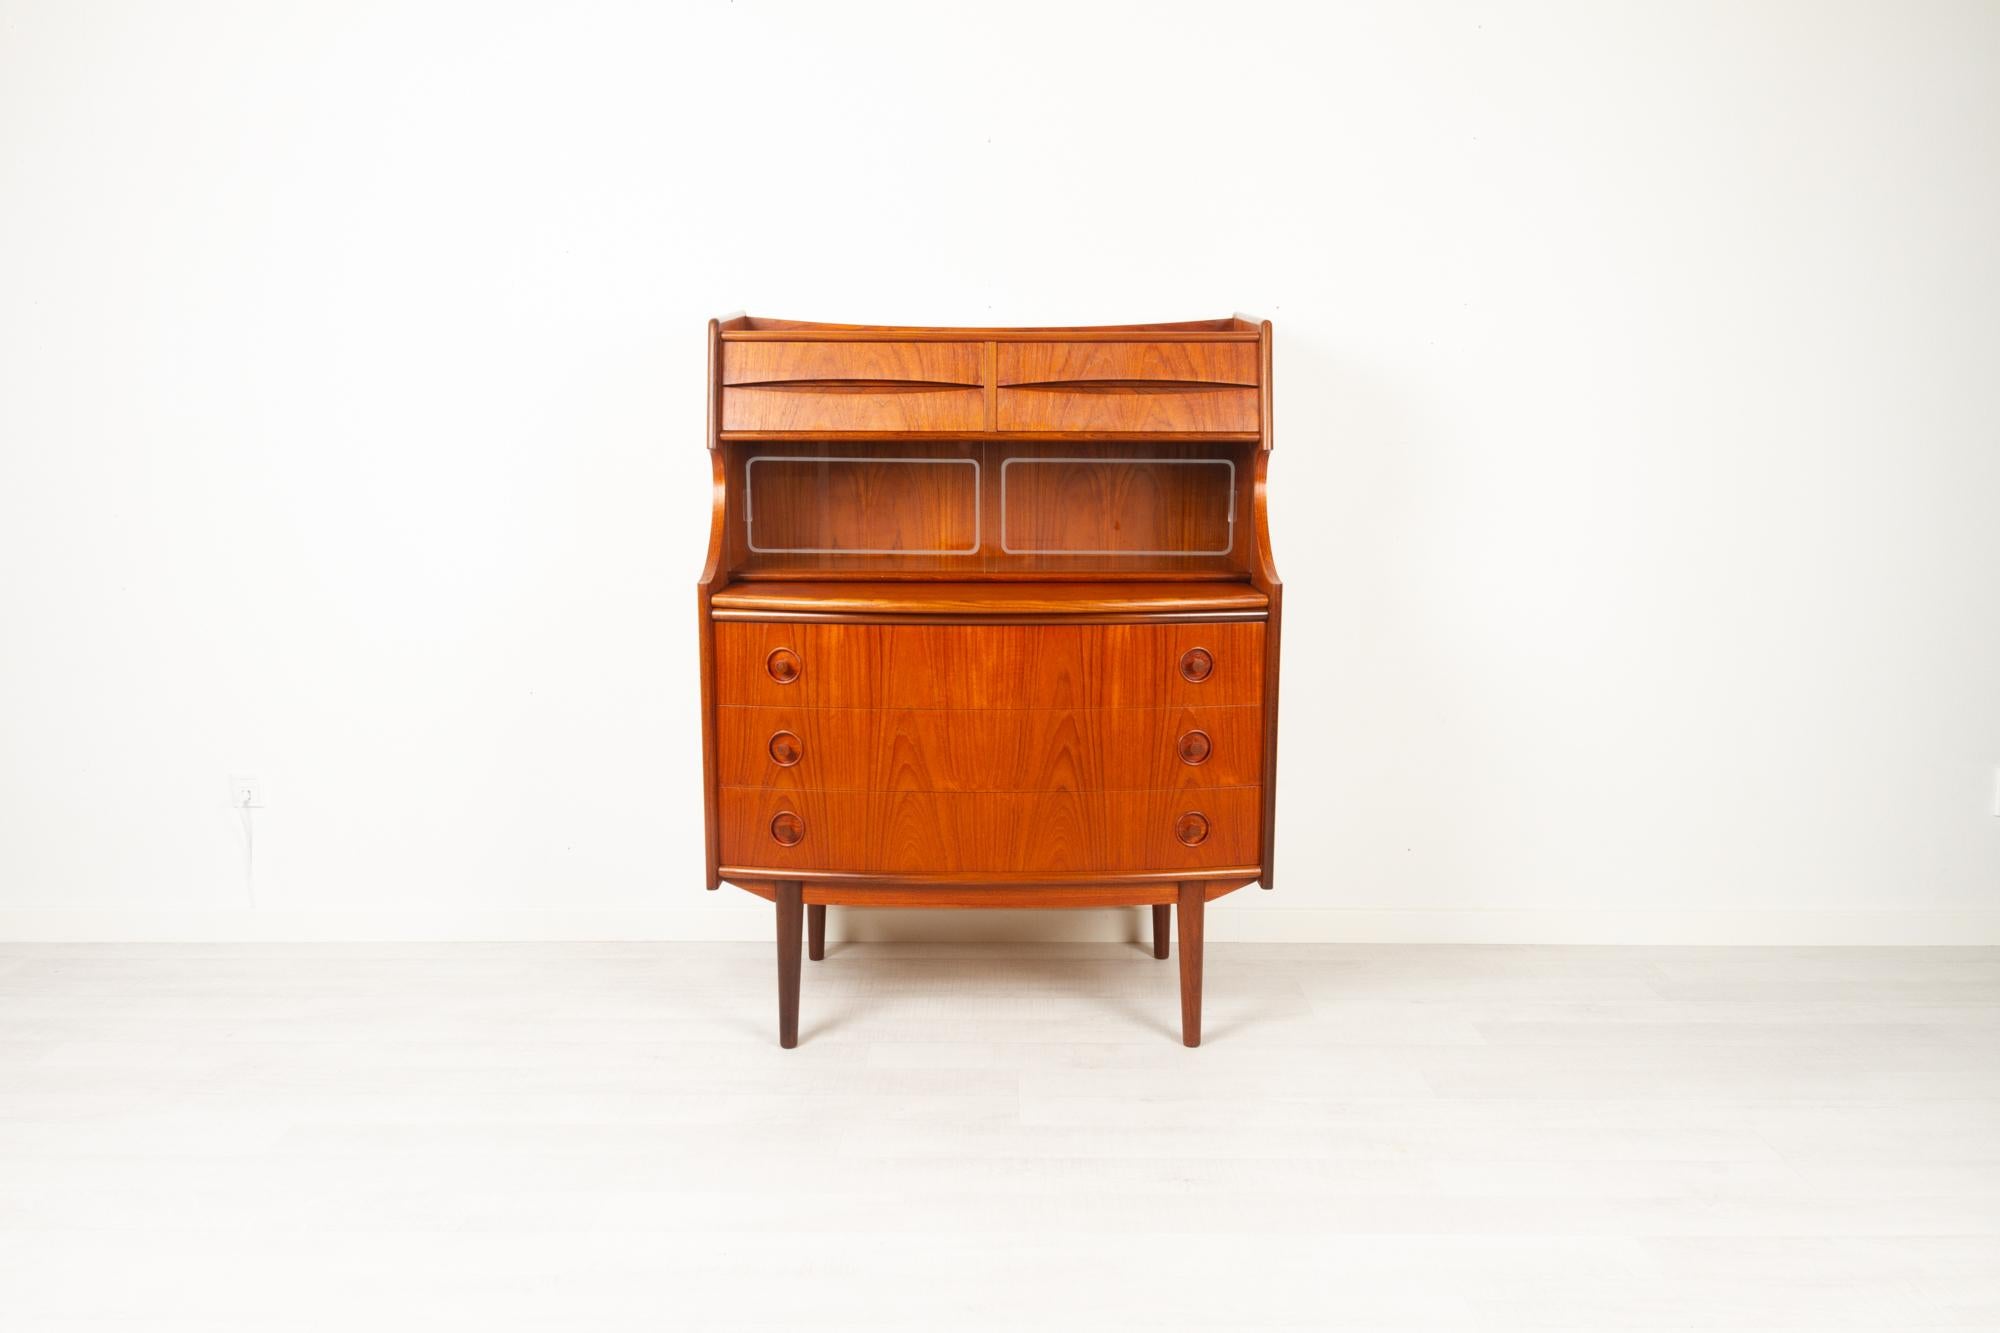 Scandinavian Modern teak secretaire by Gunnar Falsig 1960s
Mid-century modern Danish secretaire with curved front. Very elegant and versatile, both a writing desk and a chest of drawers. Manufactured by Holstebro Møbelfabrik aka Falsig Møbelfabrik.